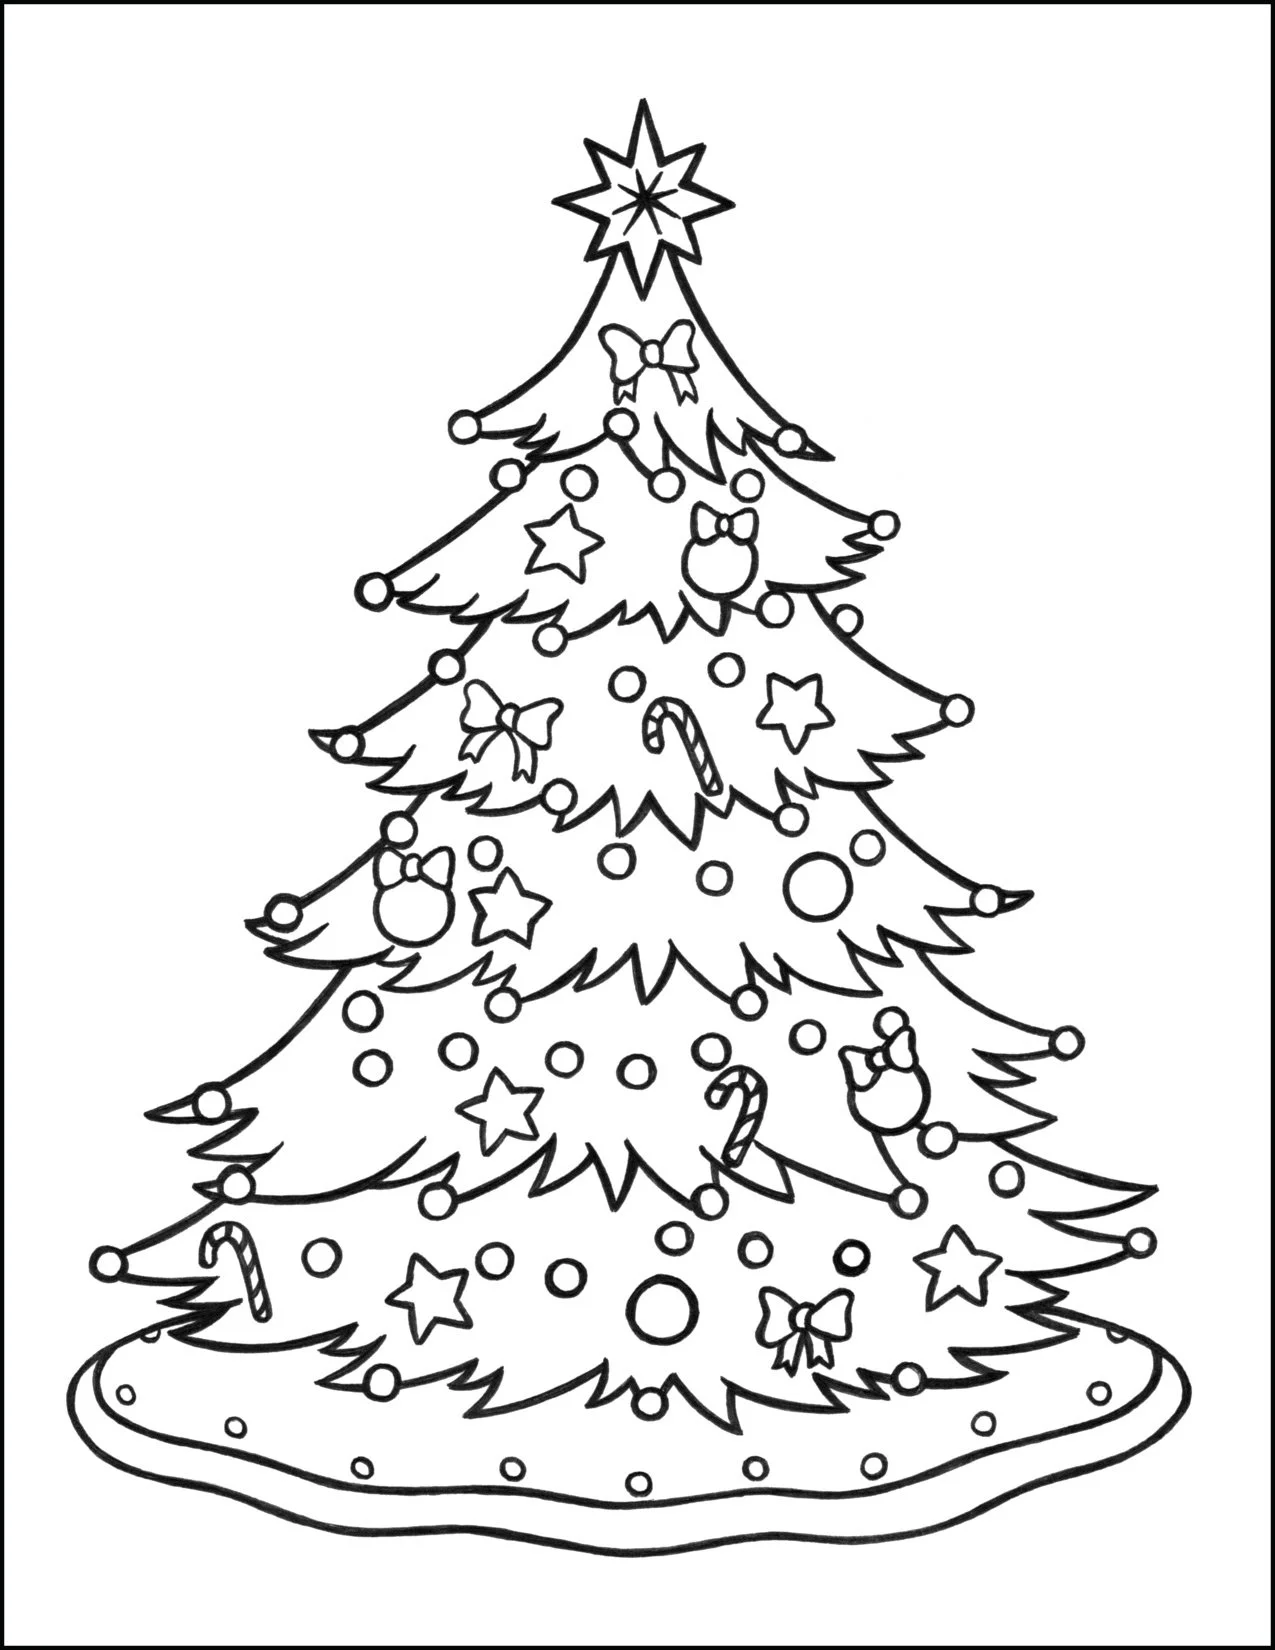 Easy Christmas Coloring Pages | Kids Coloring Pages